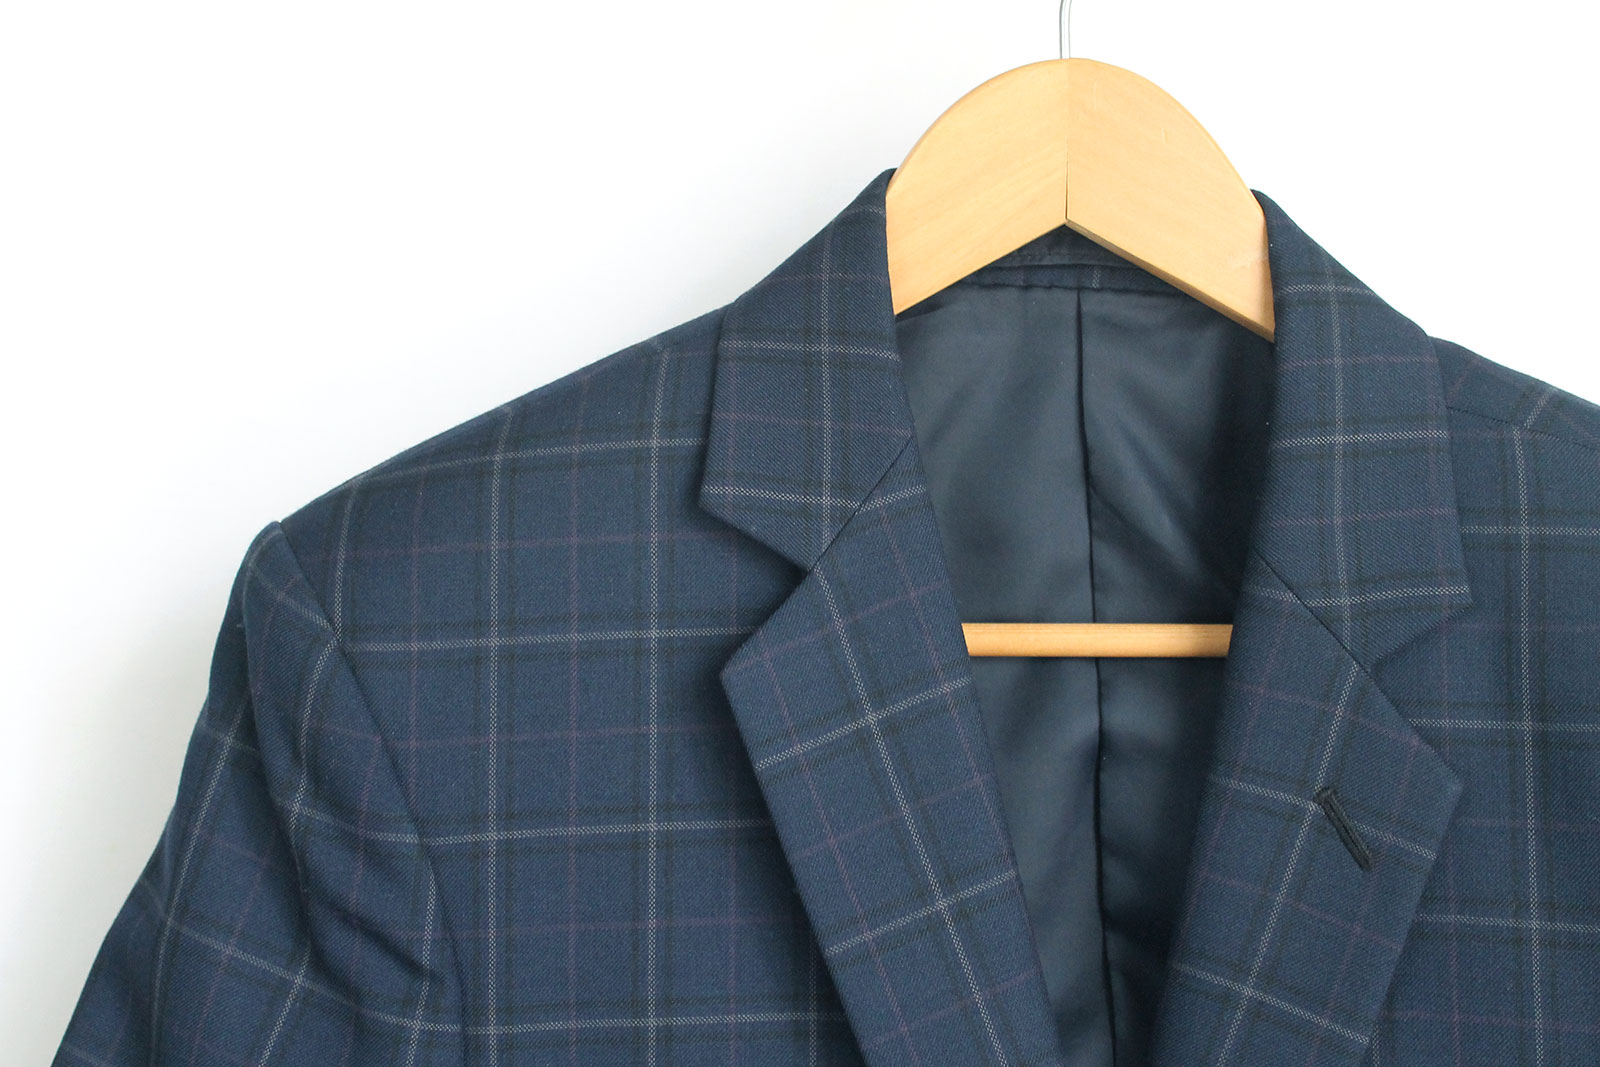 How to Clean a Suit Jacket at Home